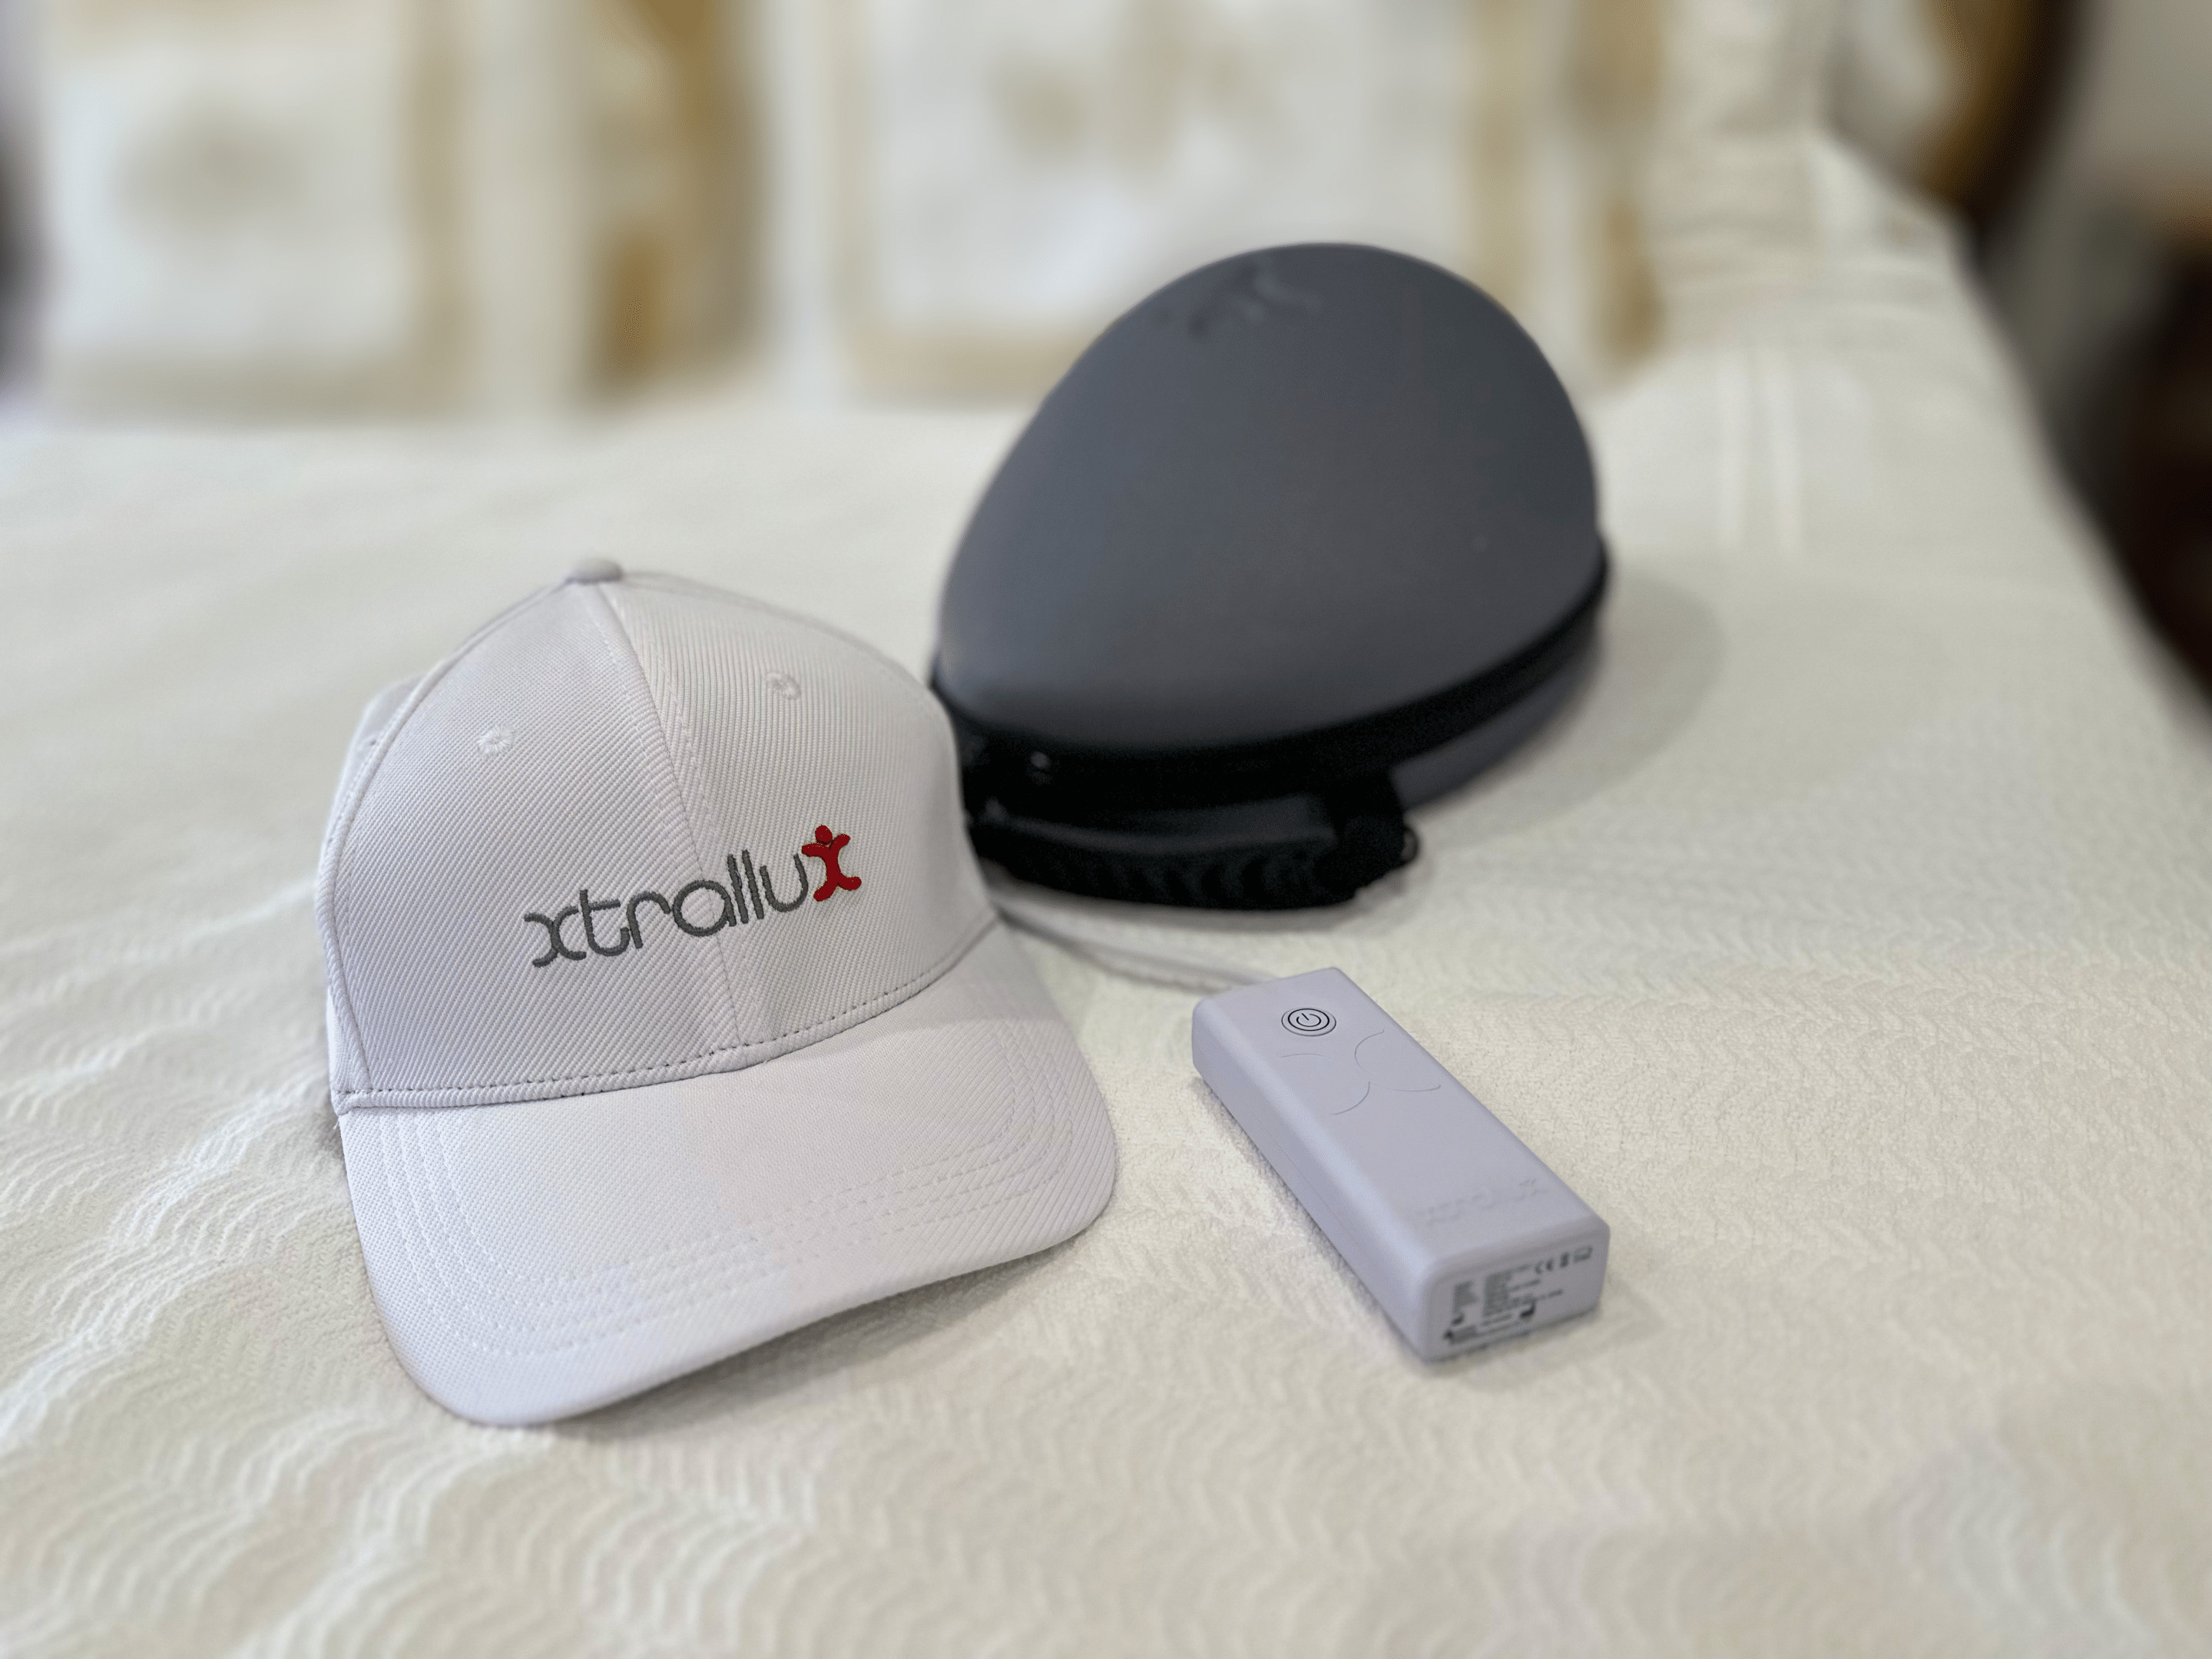 Xtrallux lasercap may be what you're looking for to treat hereditary hair loss and male pattern balding